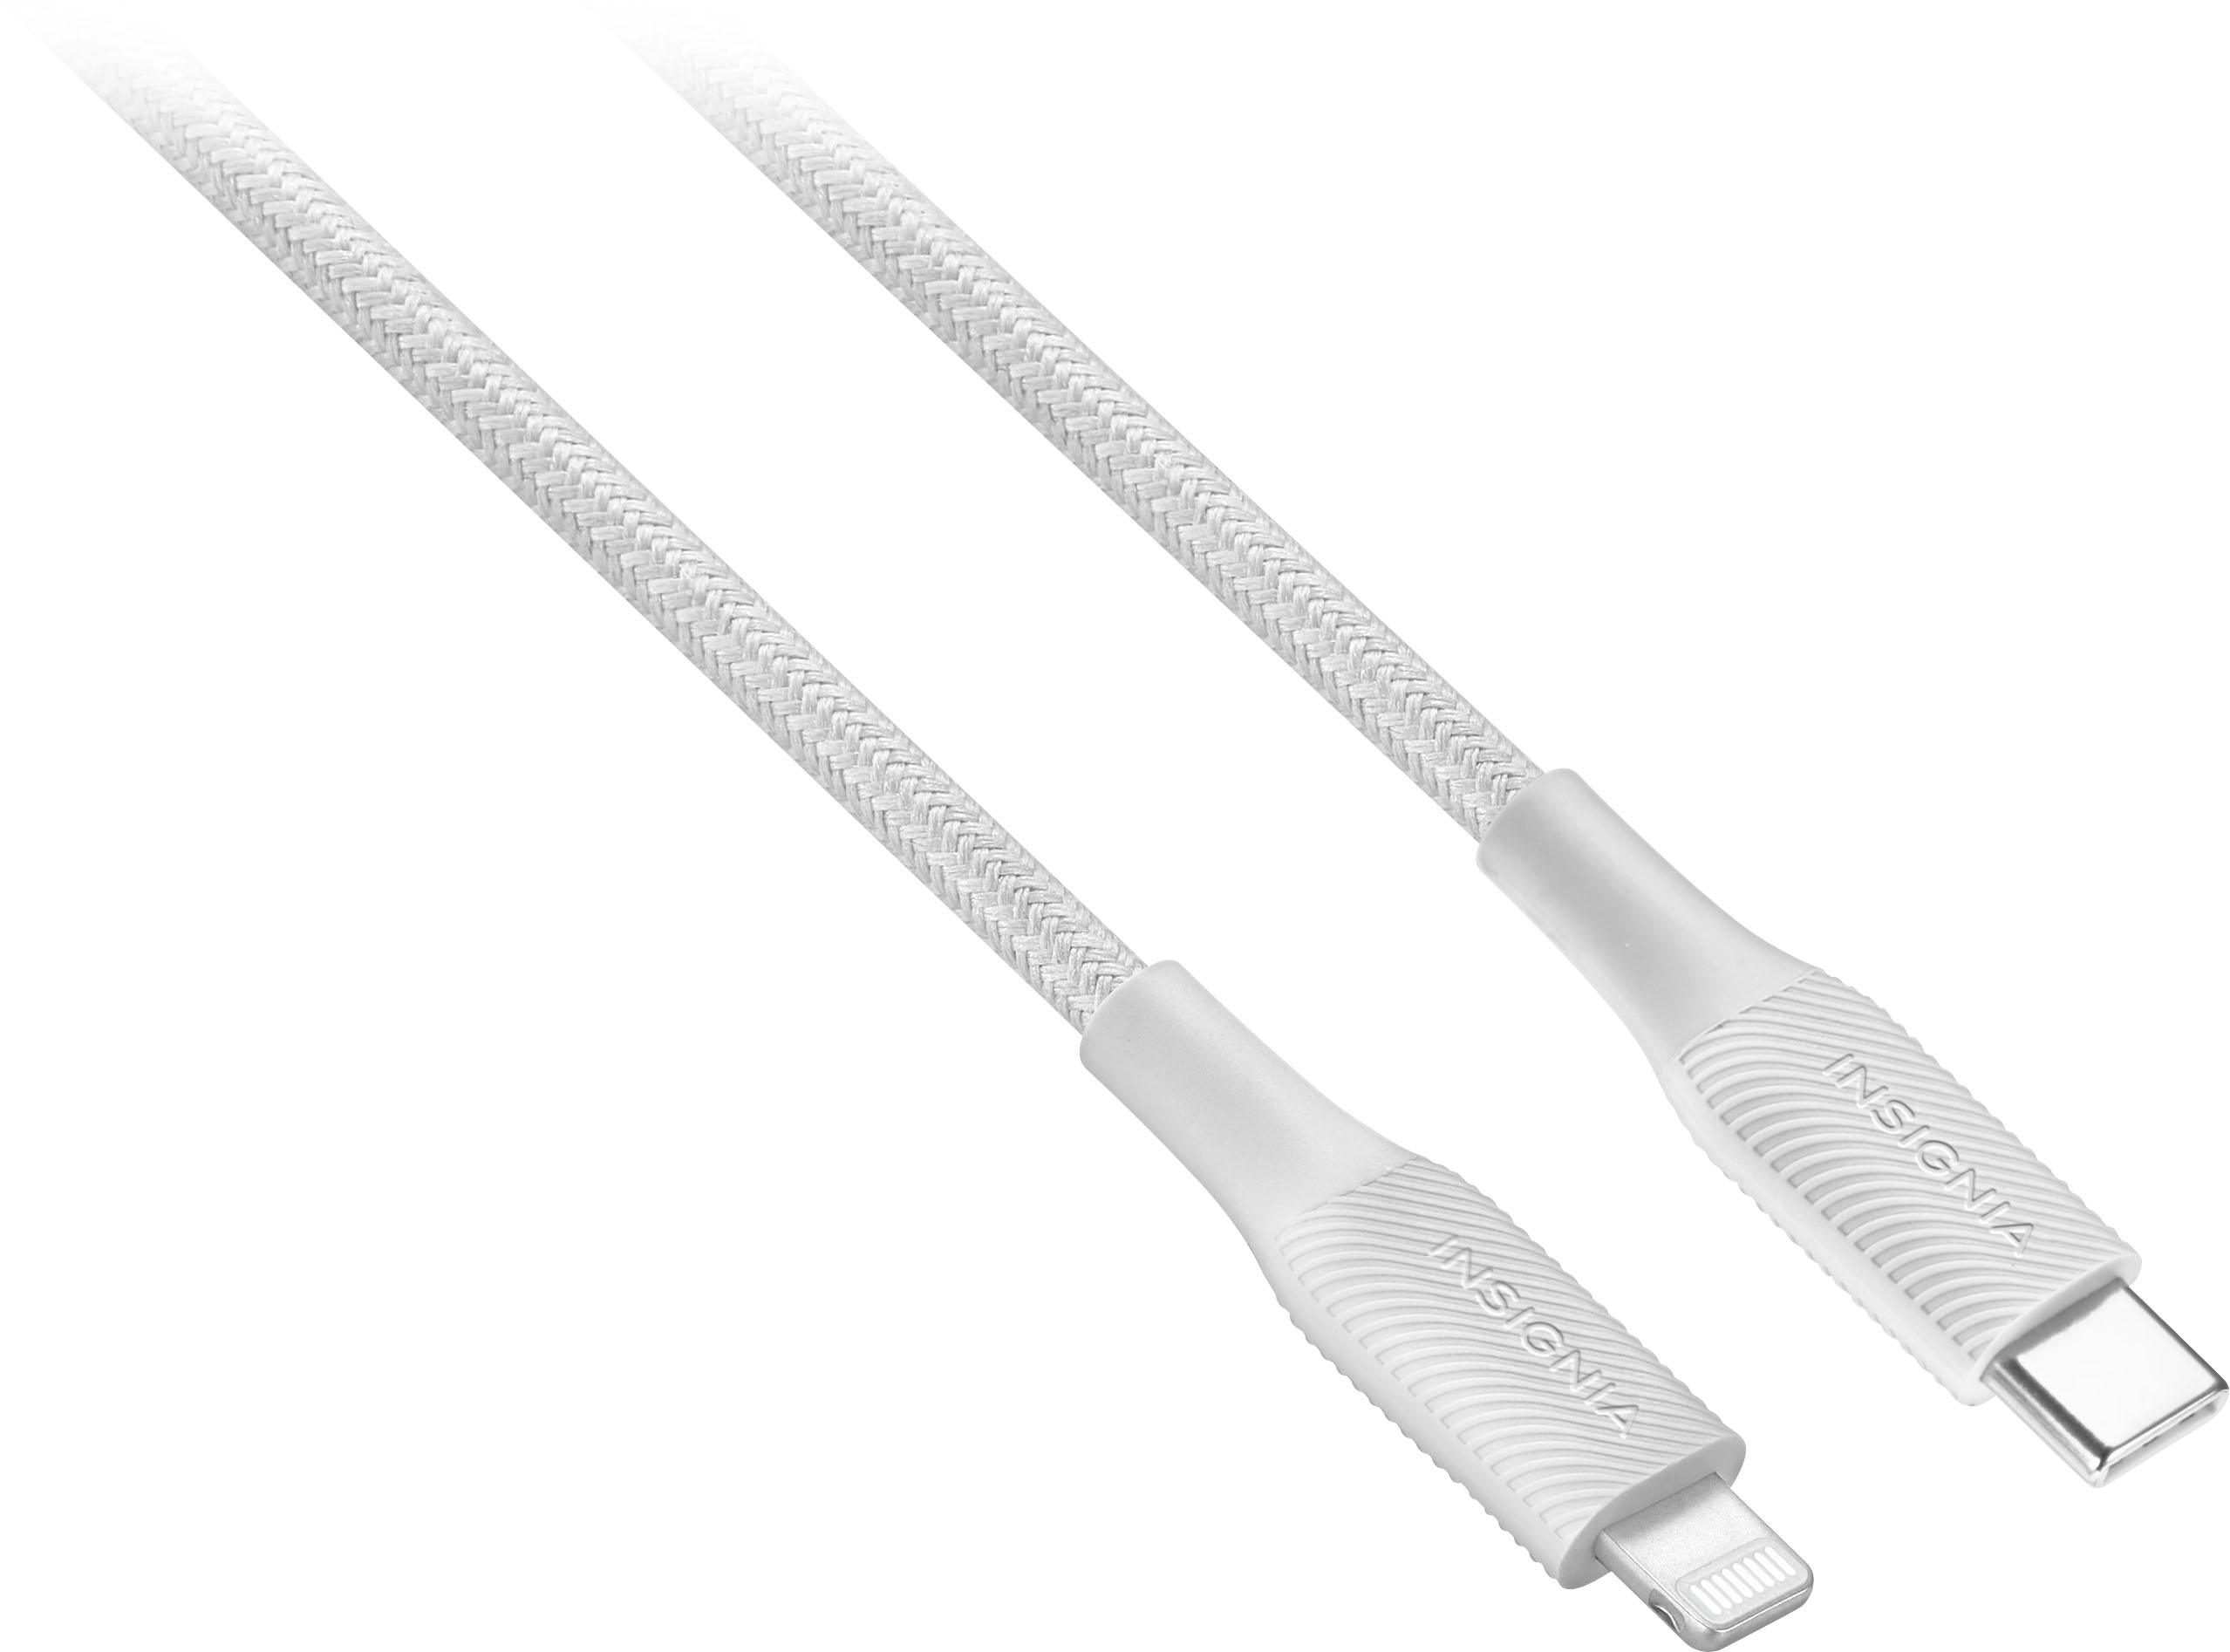 Angle View: Snakable - Apple MFi Certified 4' Lightning USB Charging Cable - Cloud white